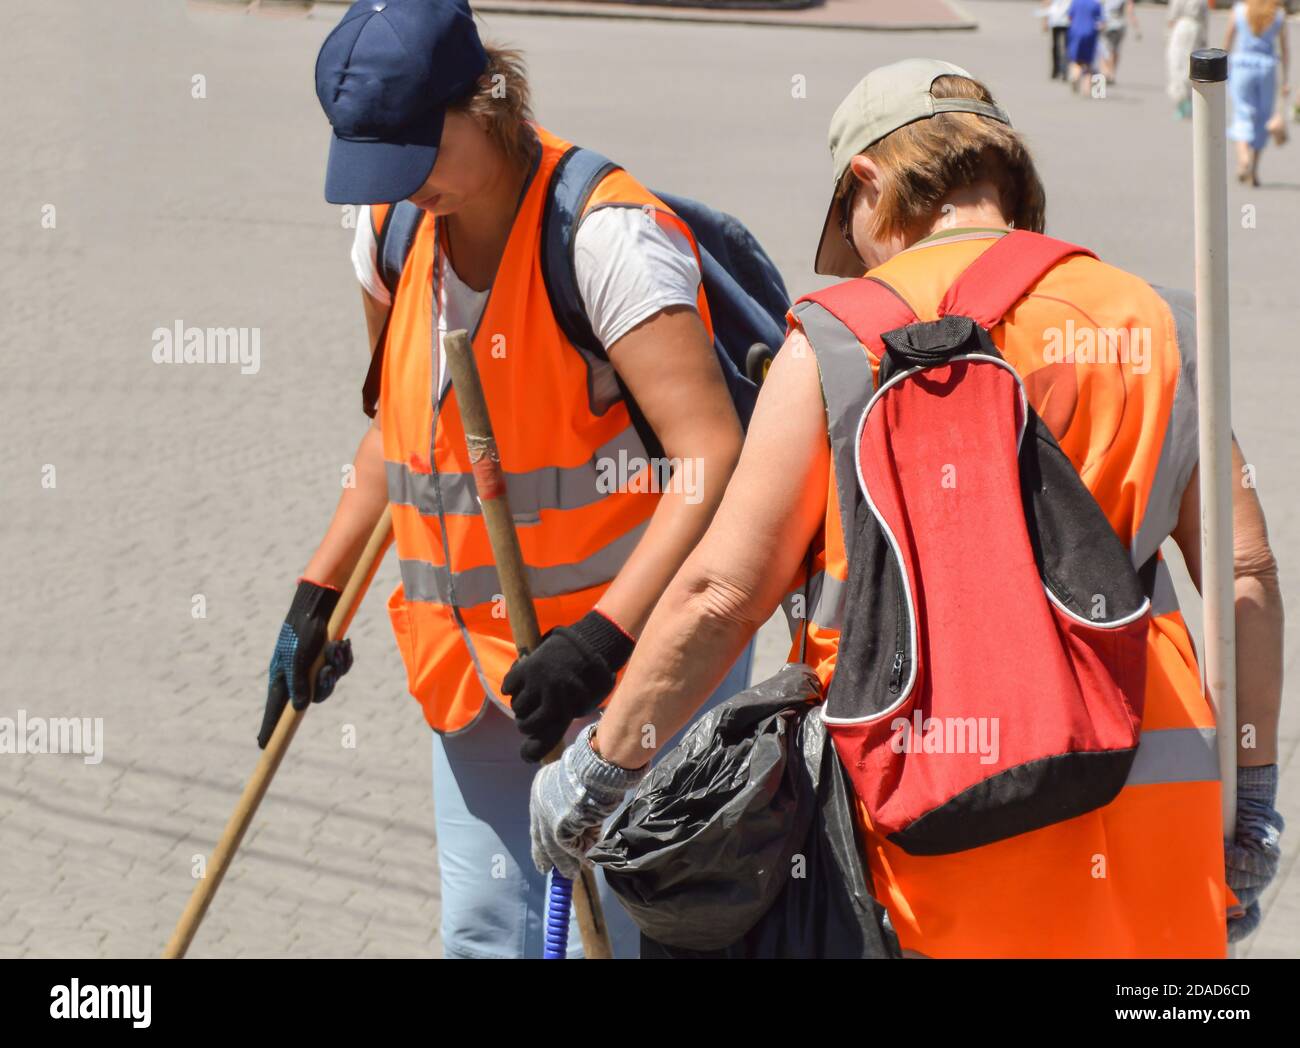 Two female cleaners in orange vests clean outside with tools, outdoor, summer Stock Photo